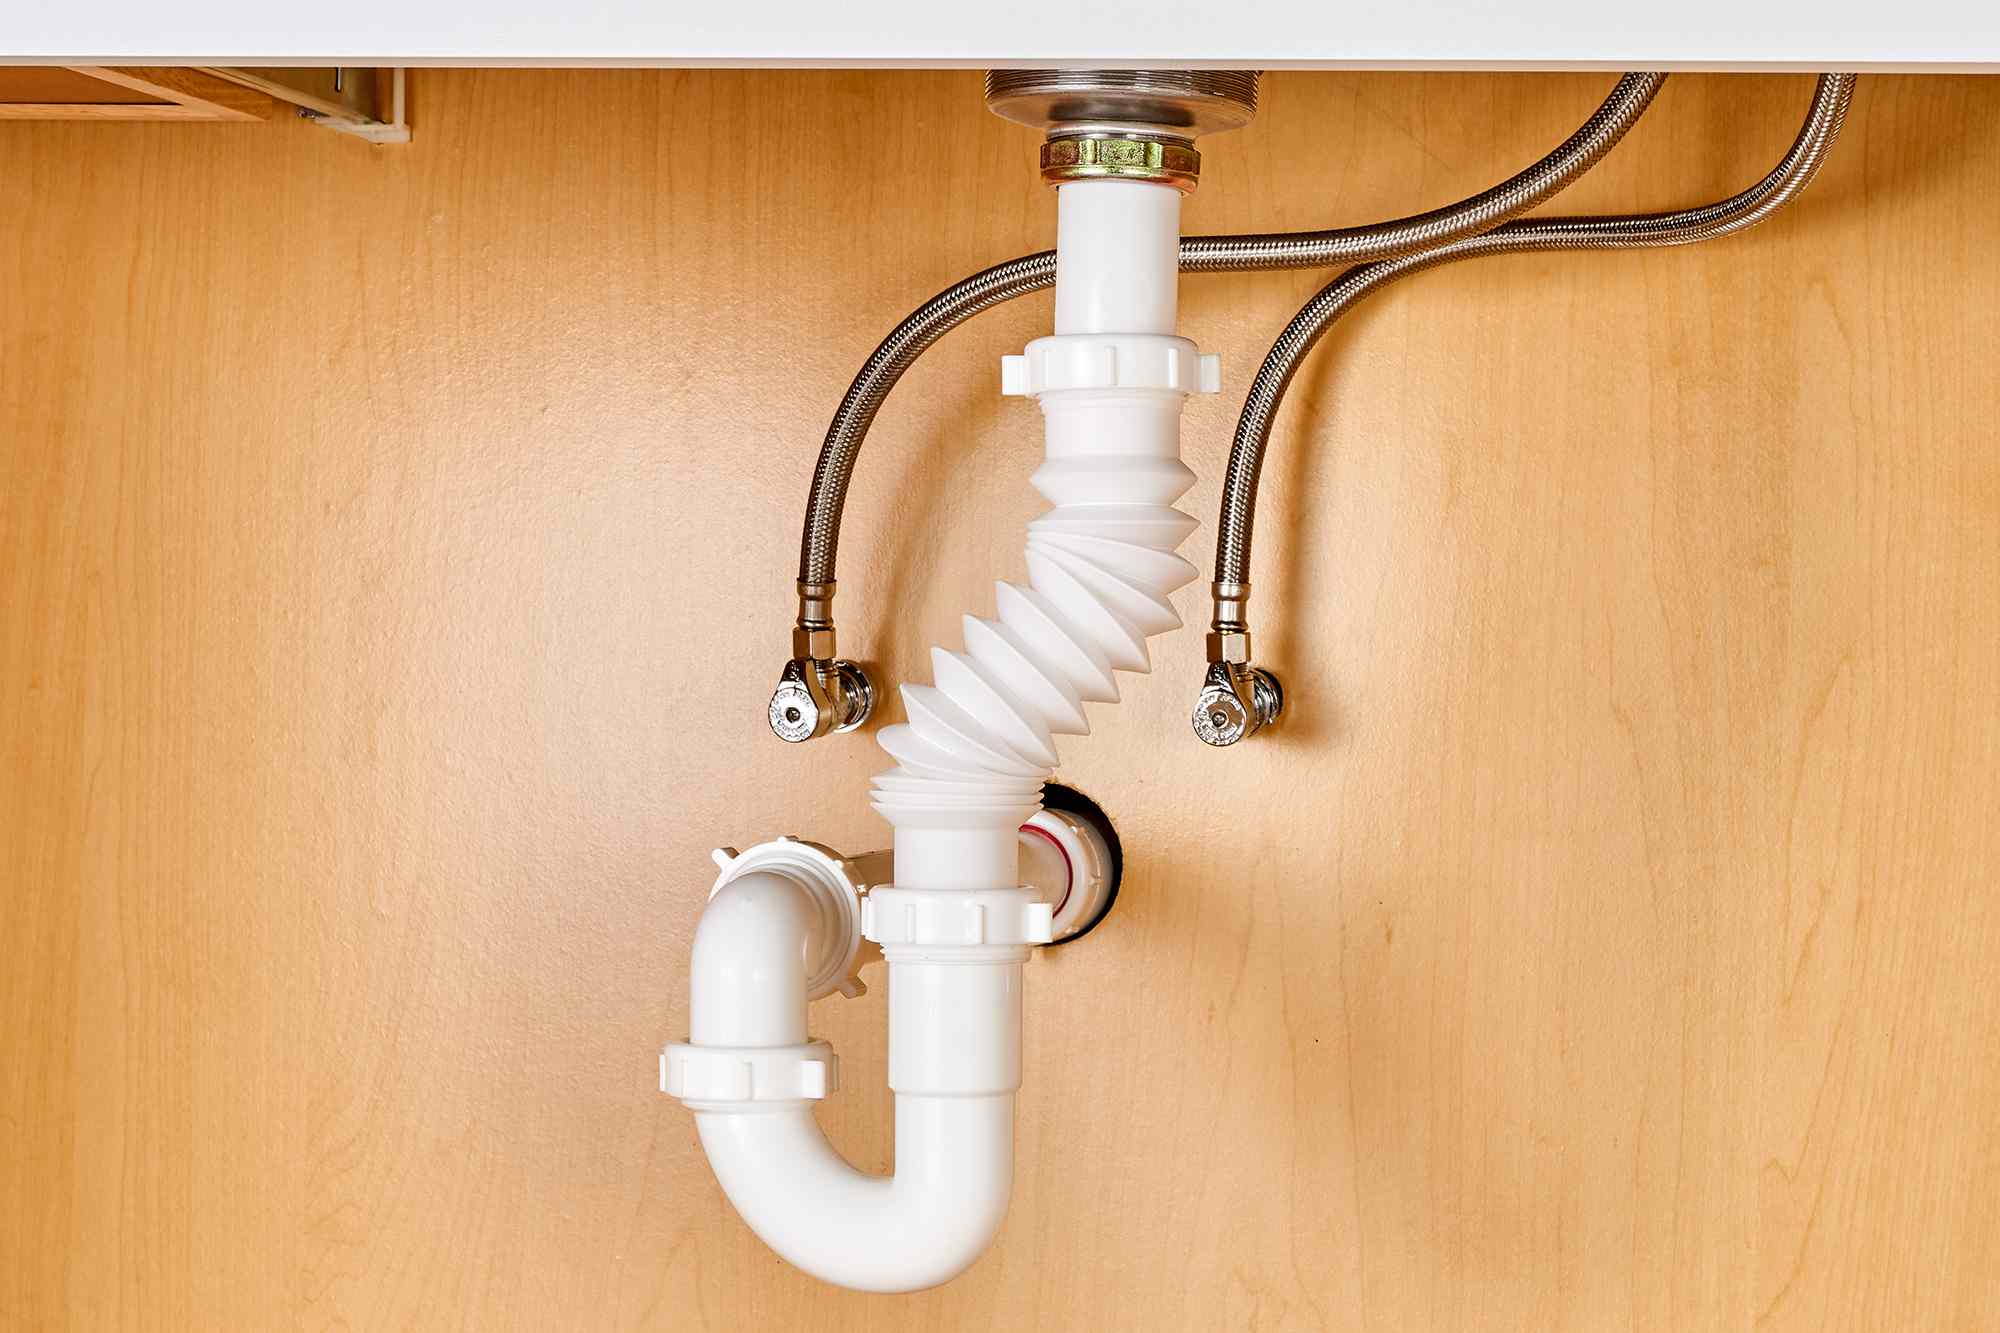 How To Connect Sink Drain